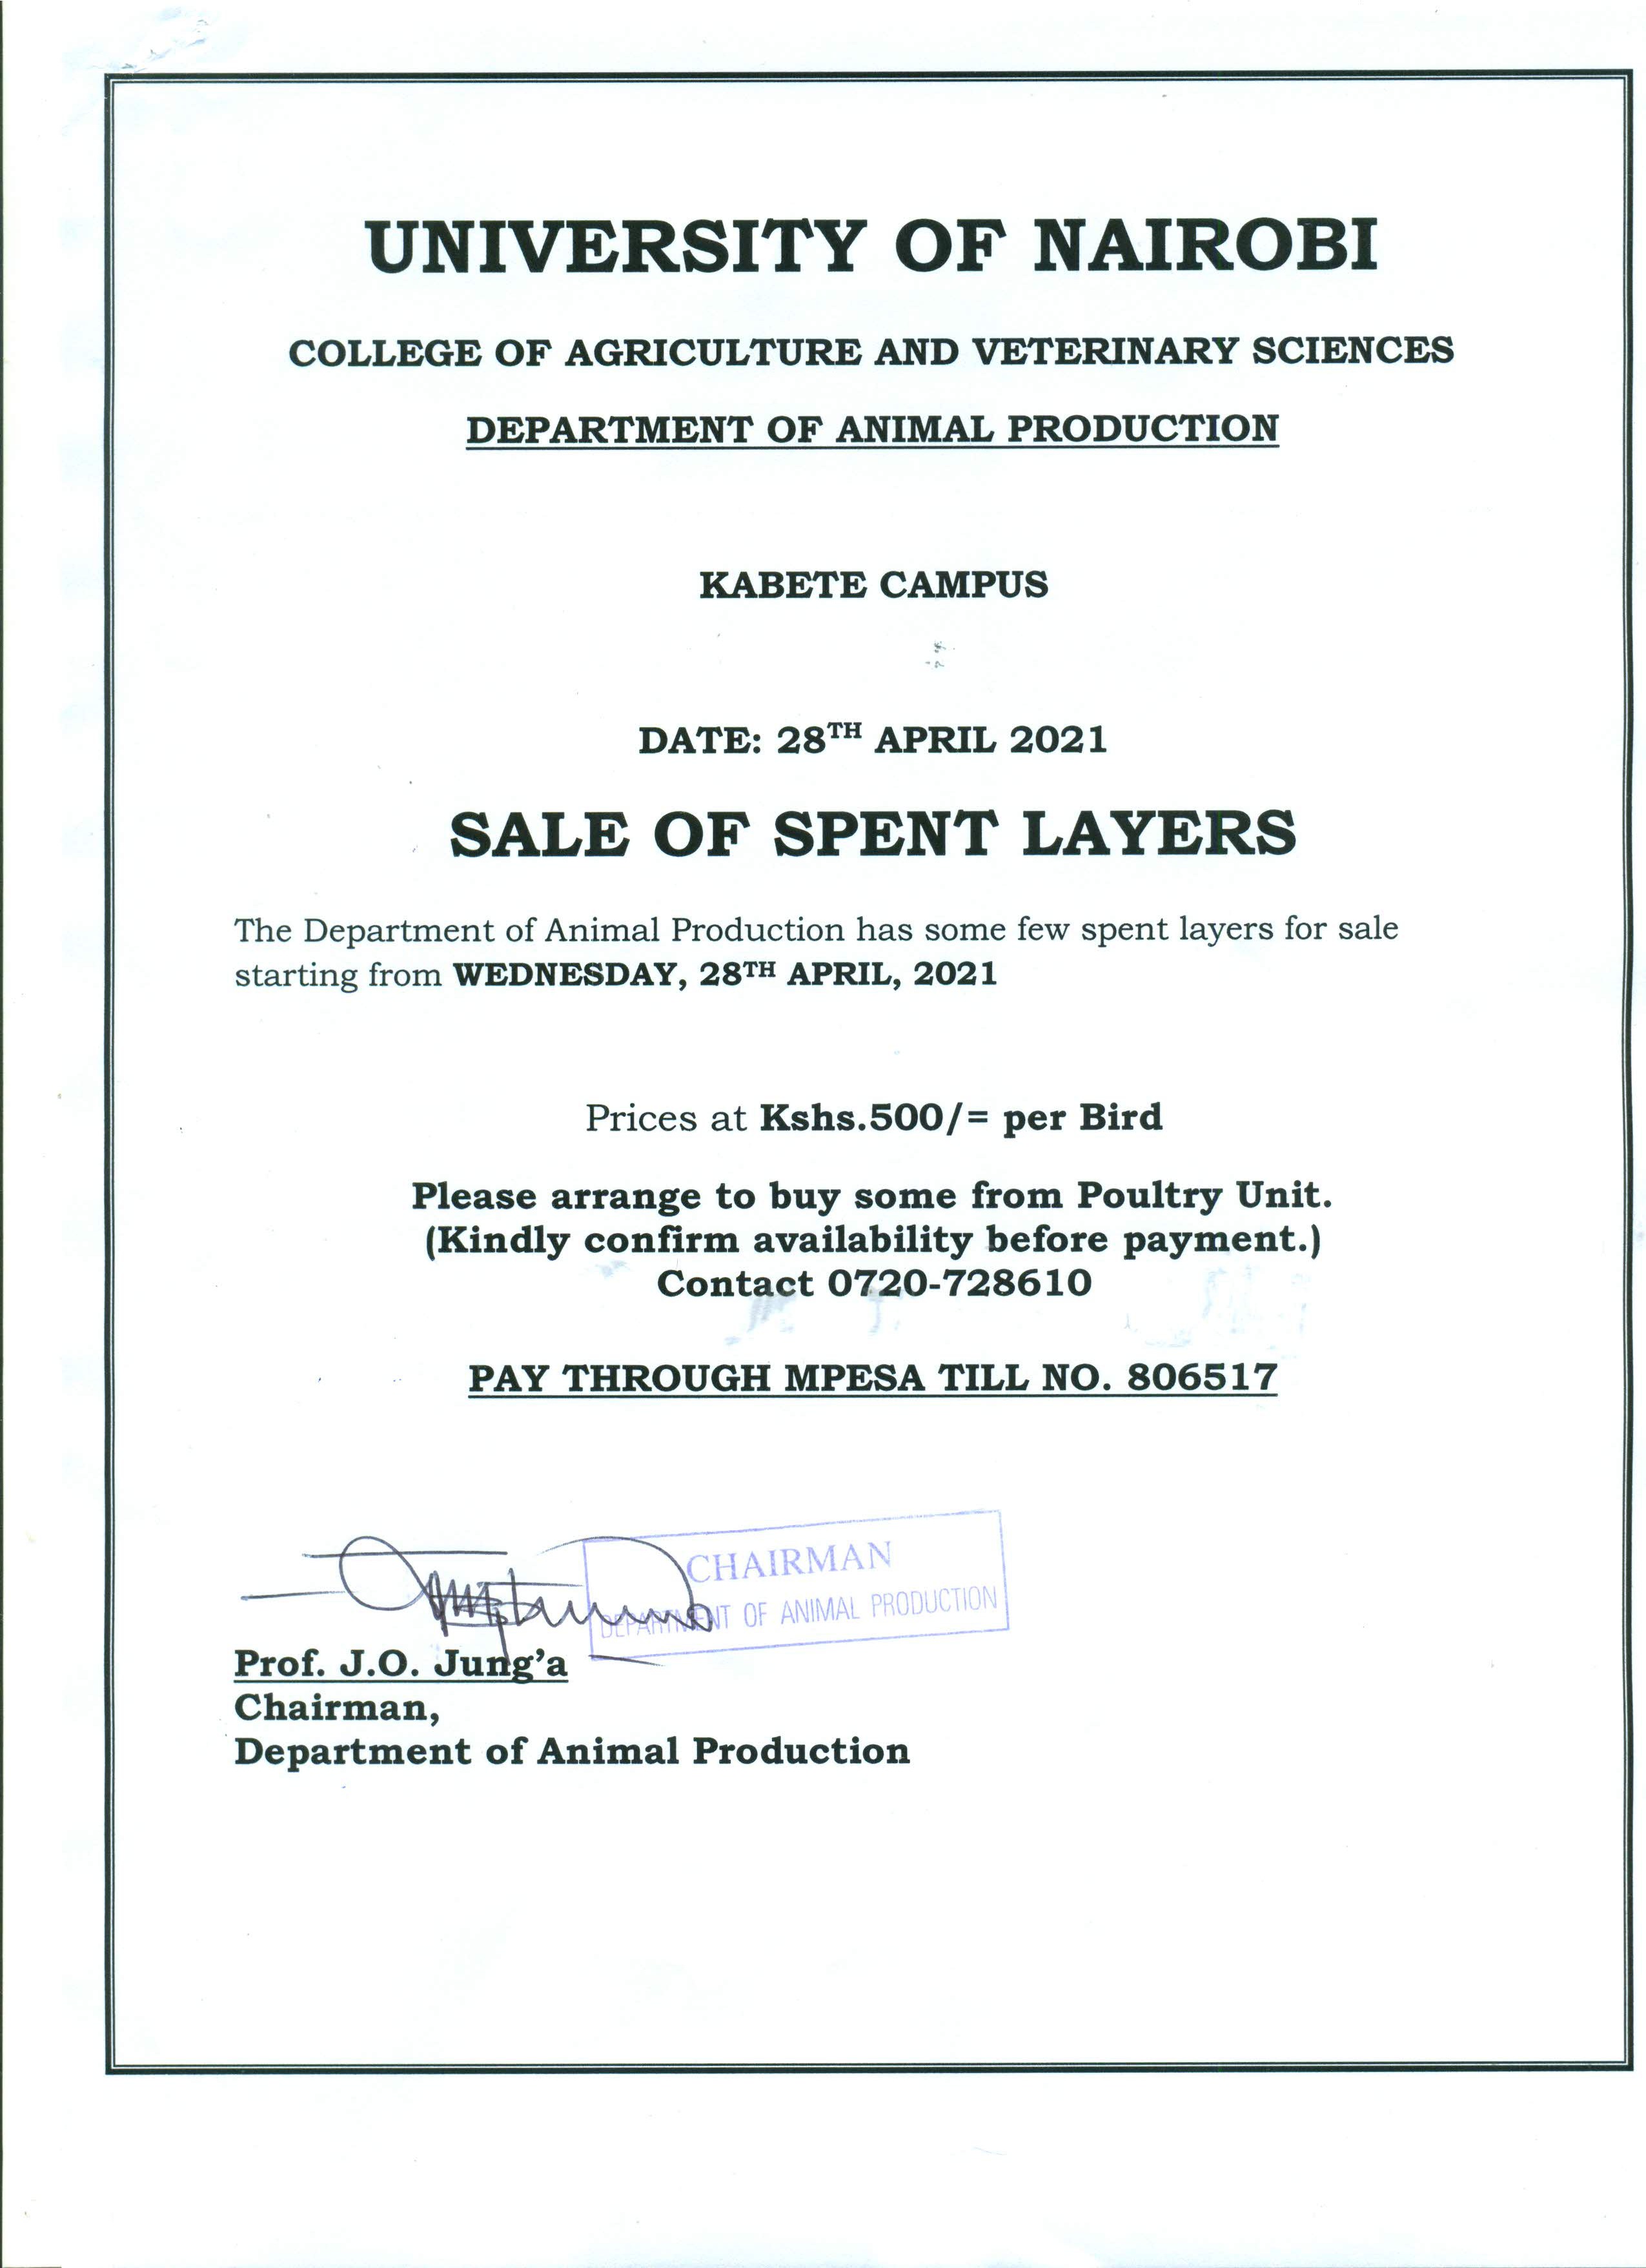 Sale of spent layers chicken